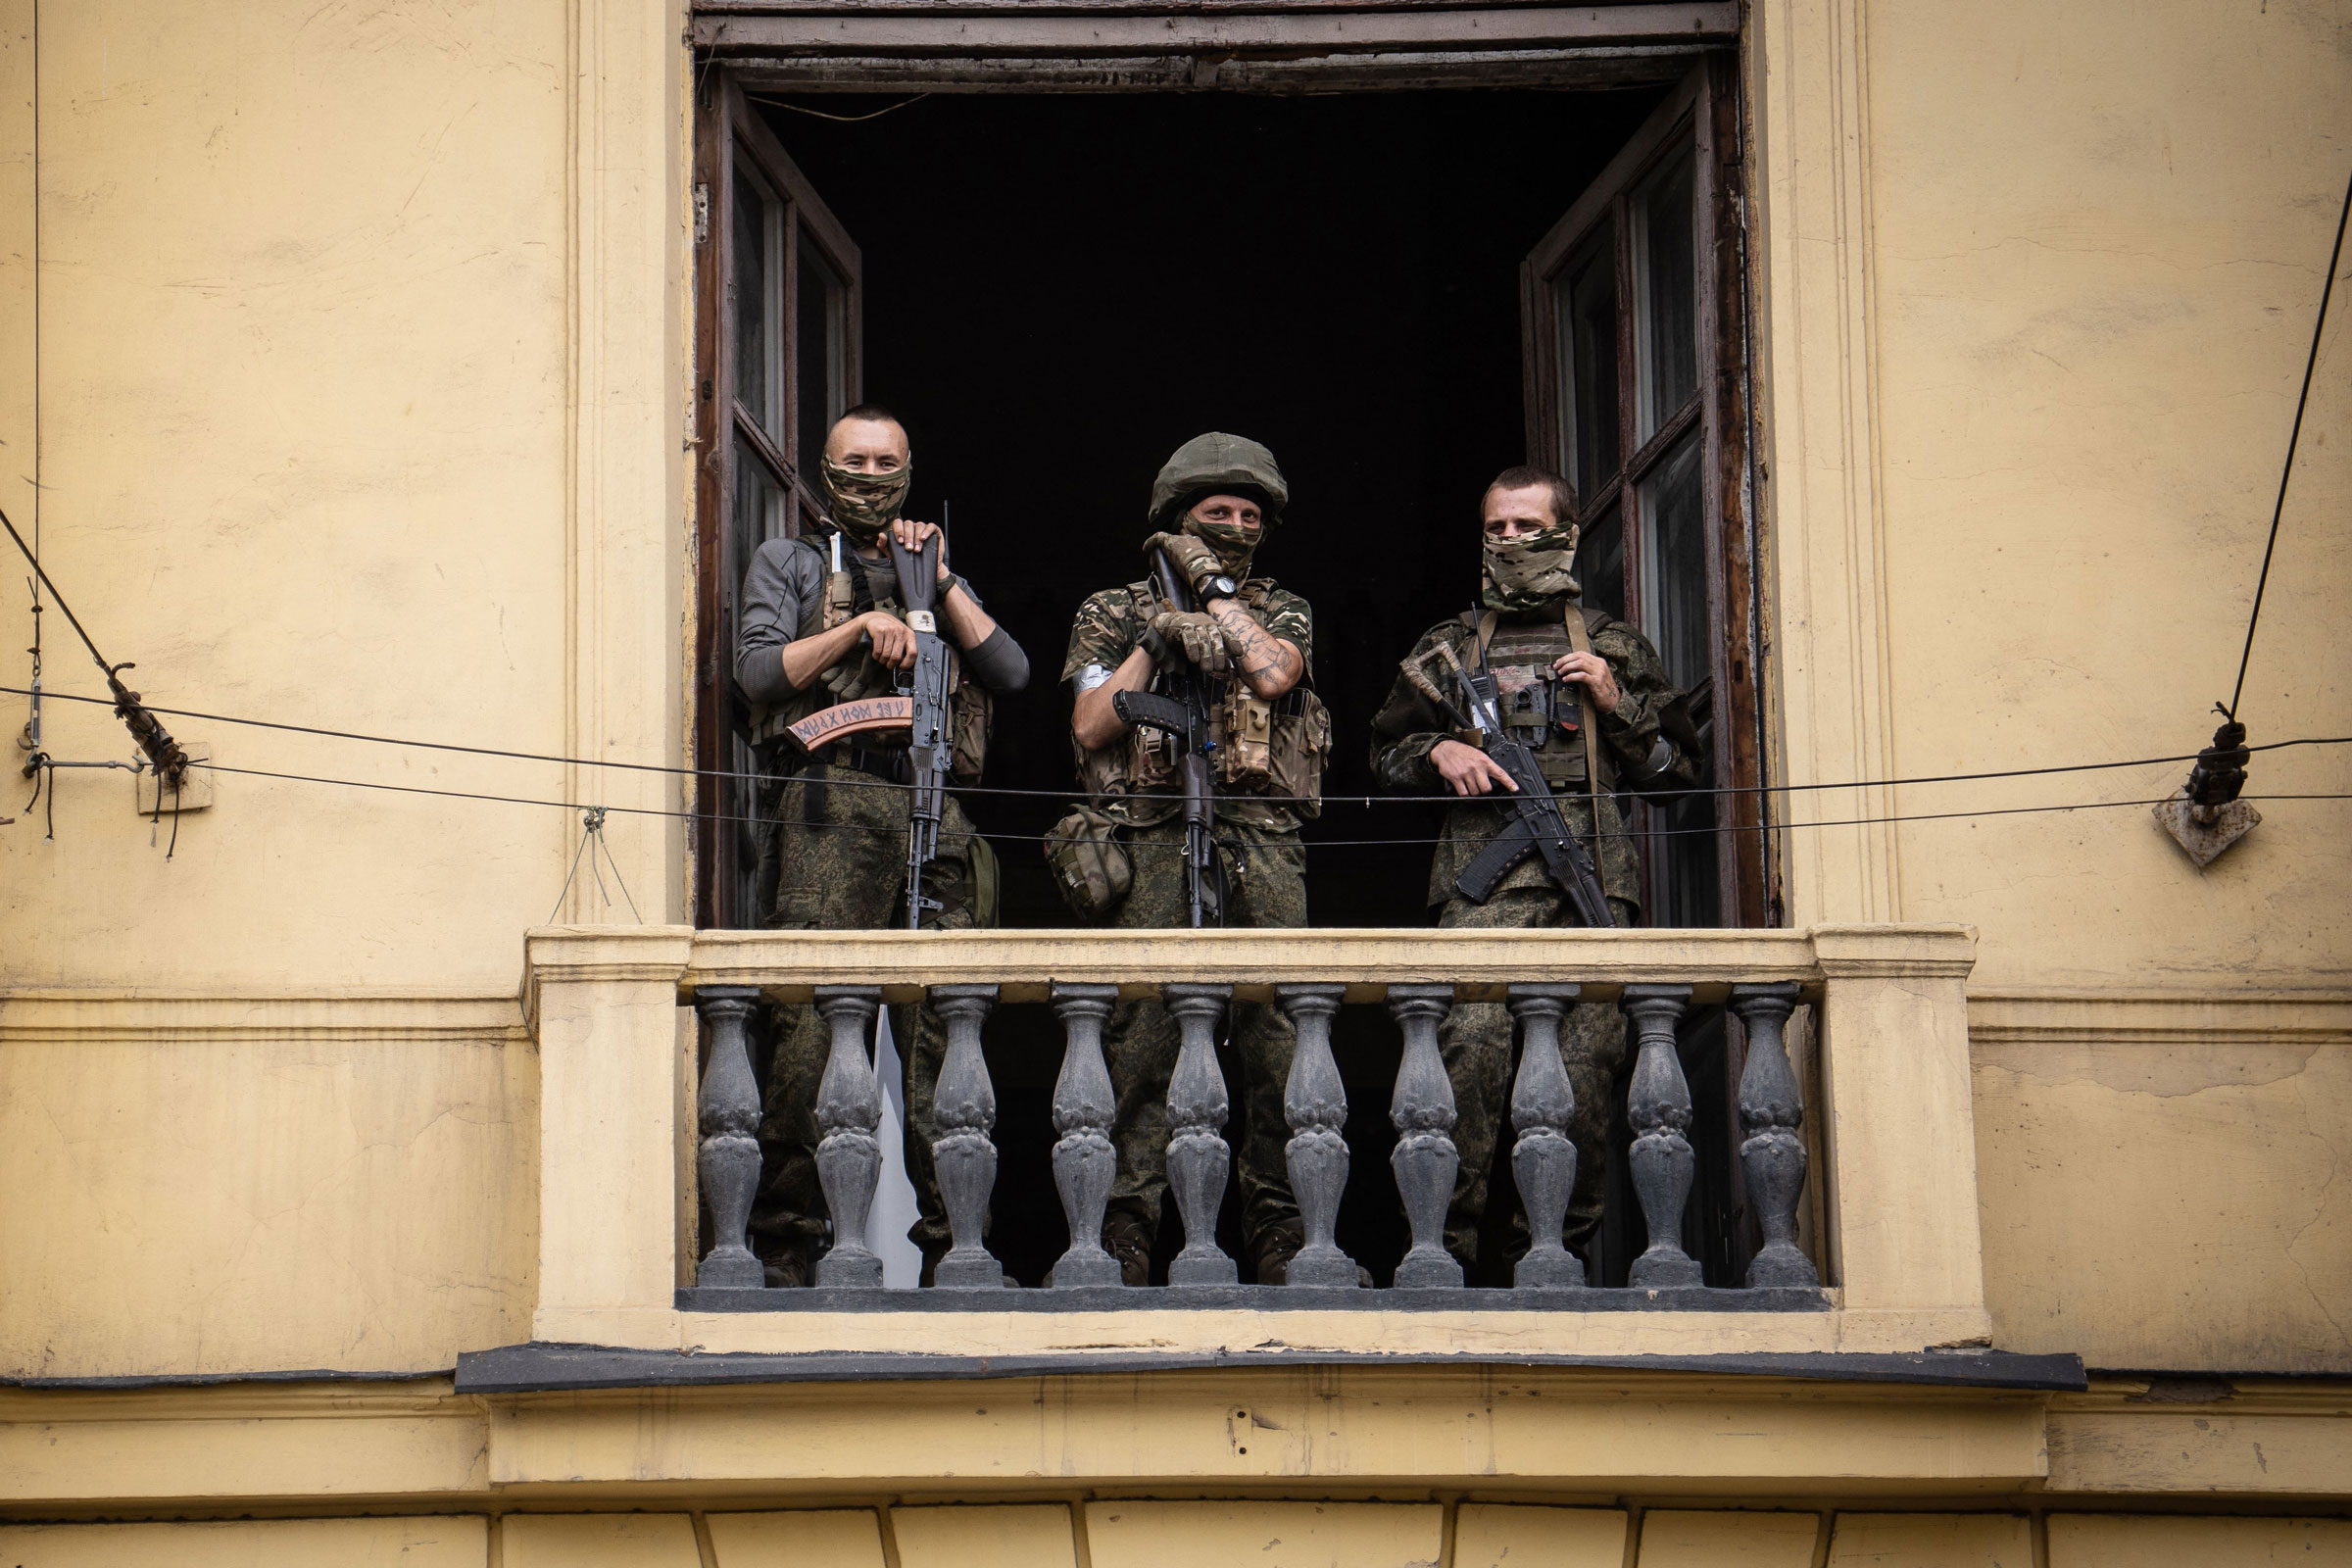 Members of Wagner group carrying weapons stand on a balcony